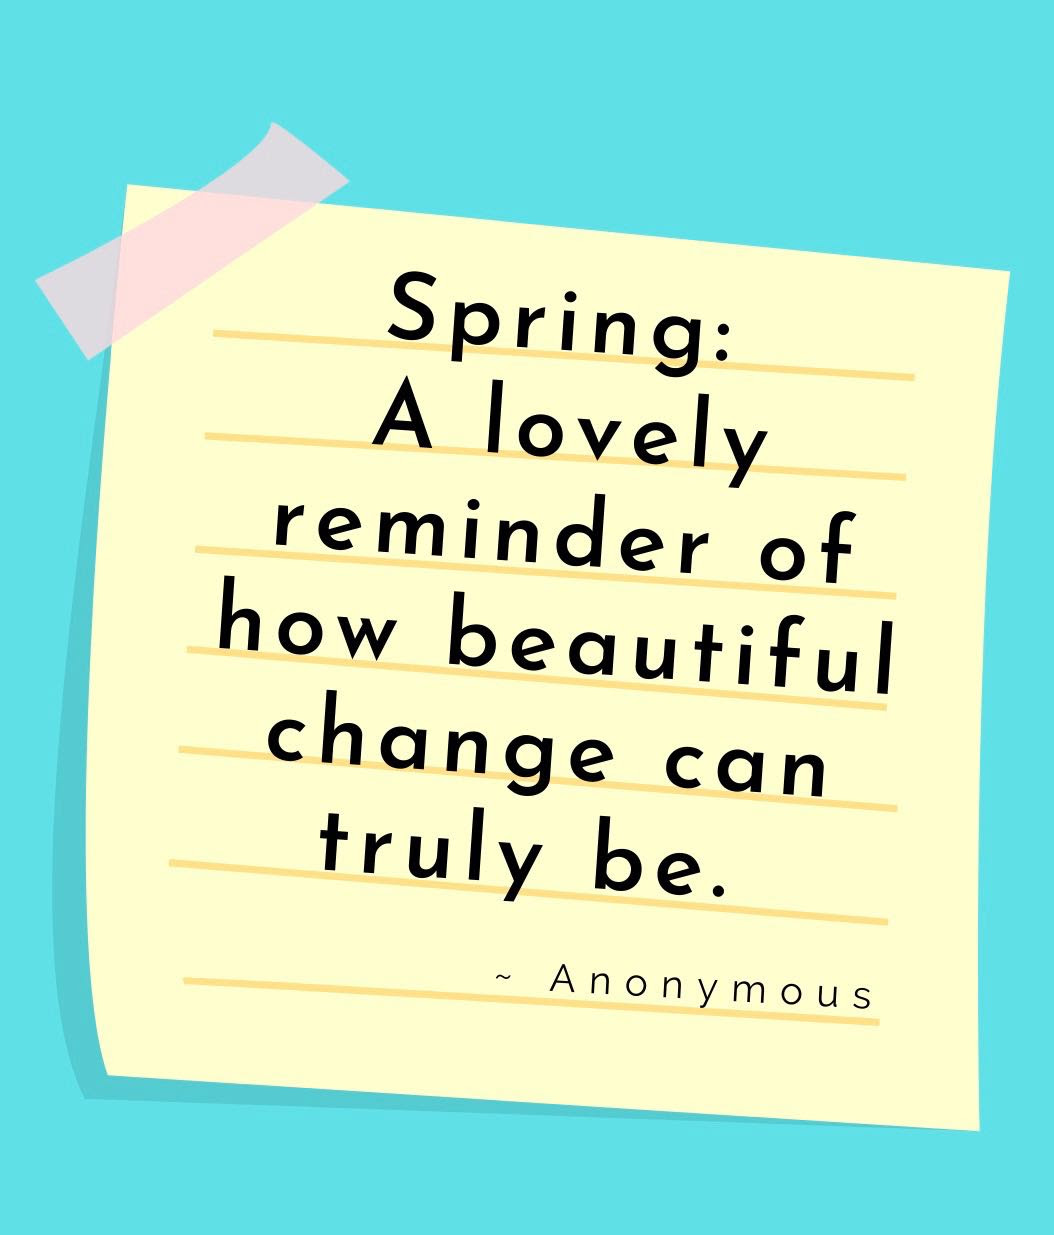 spring - a lovely reminder of how beautiful change can truly be